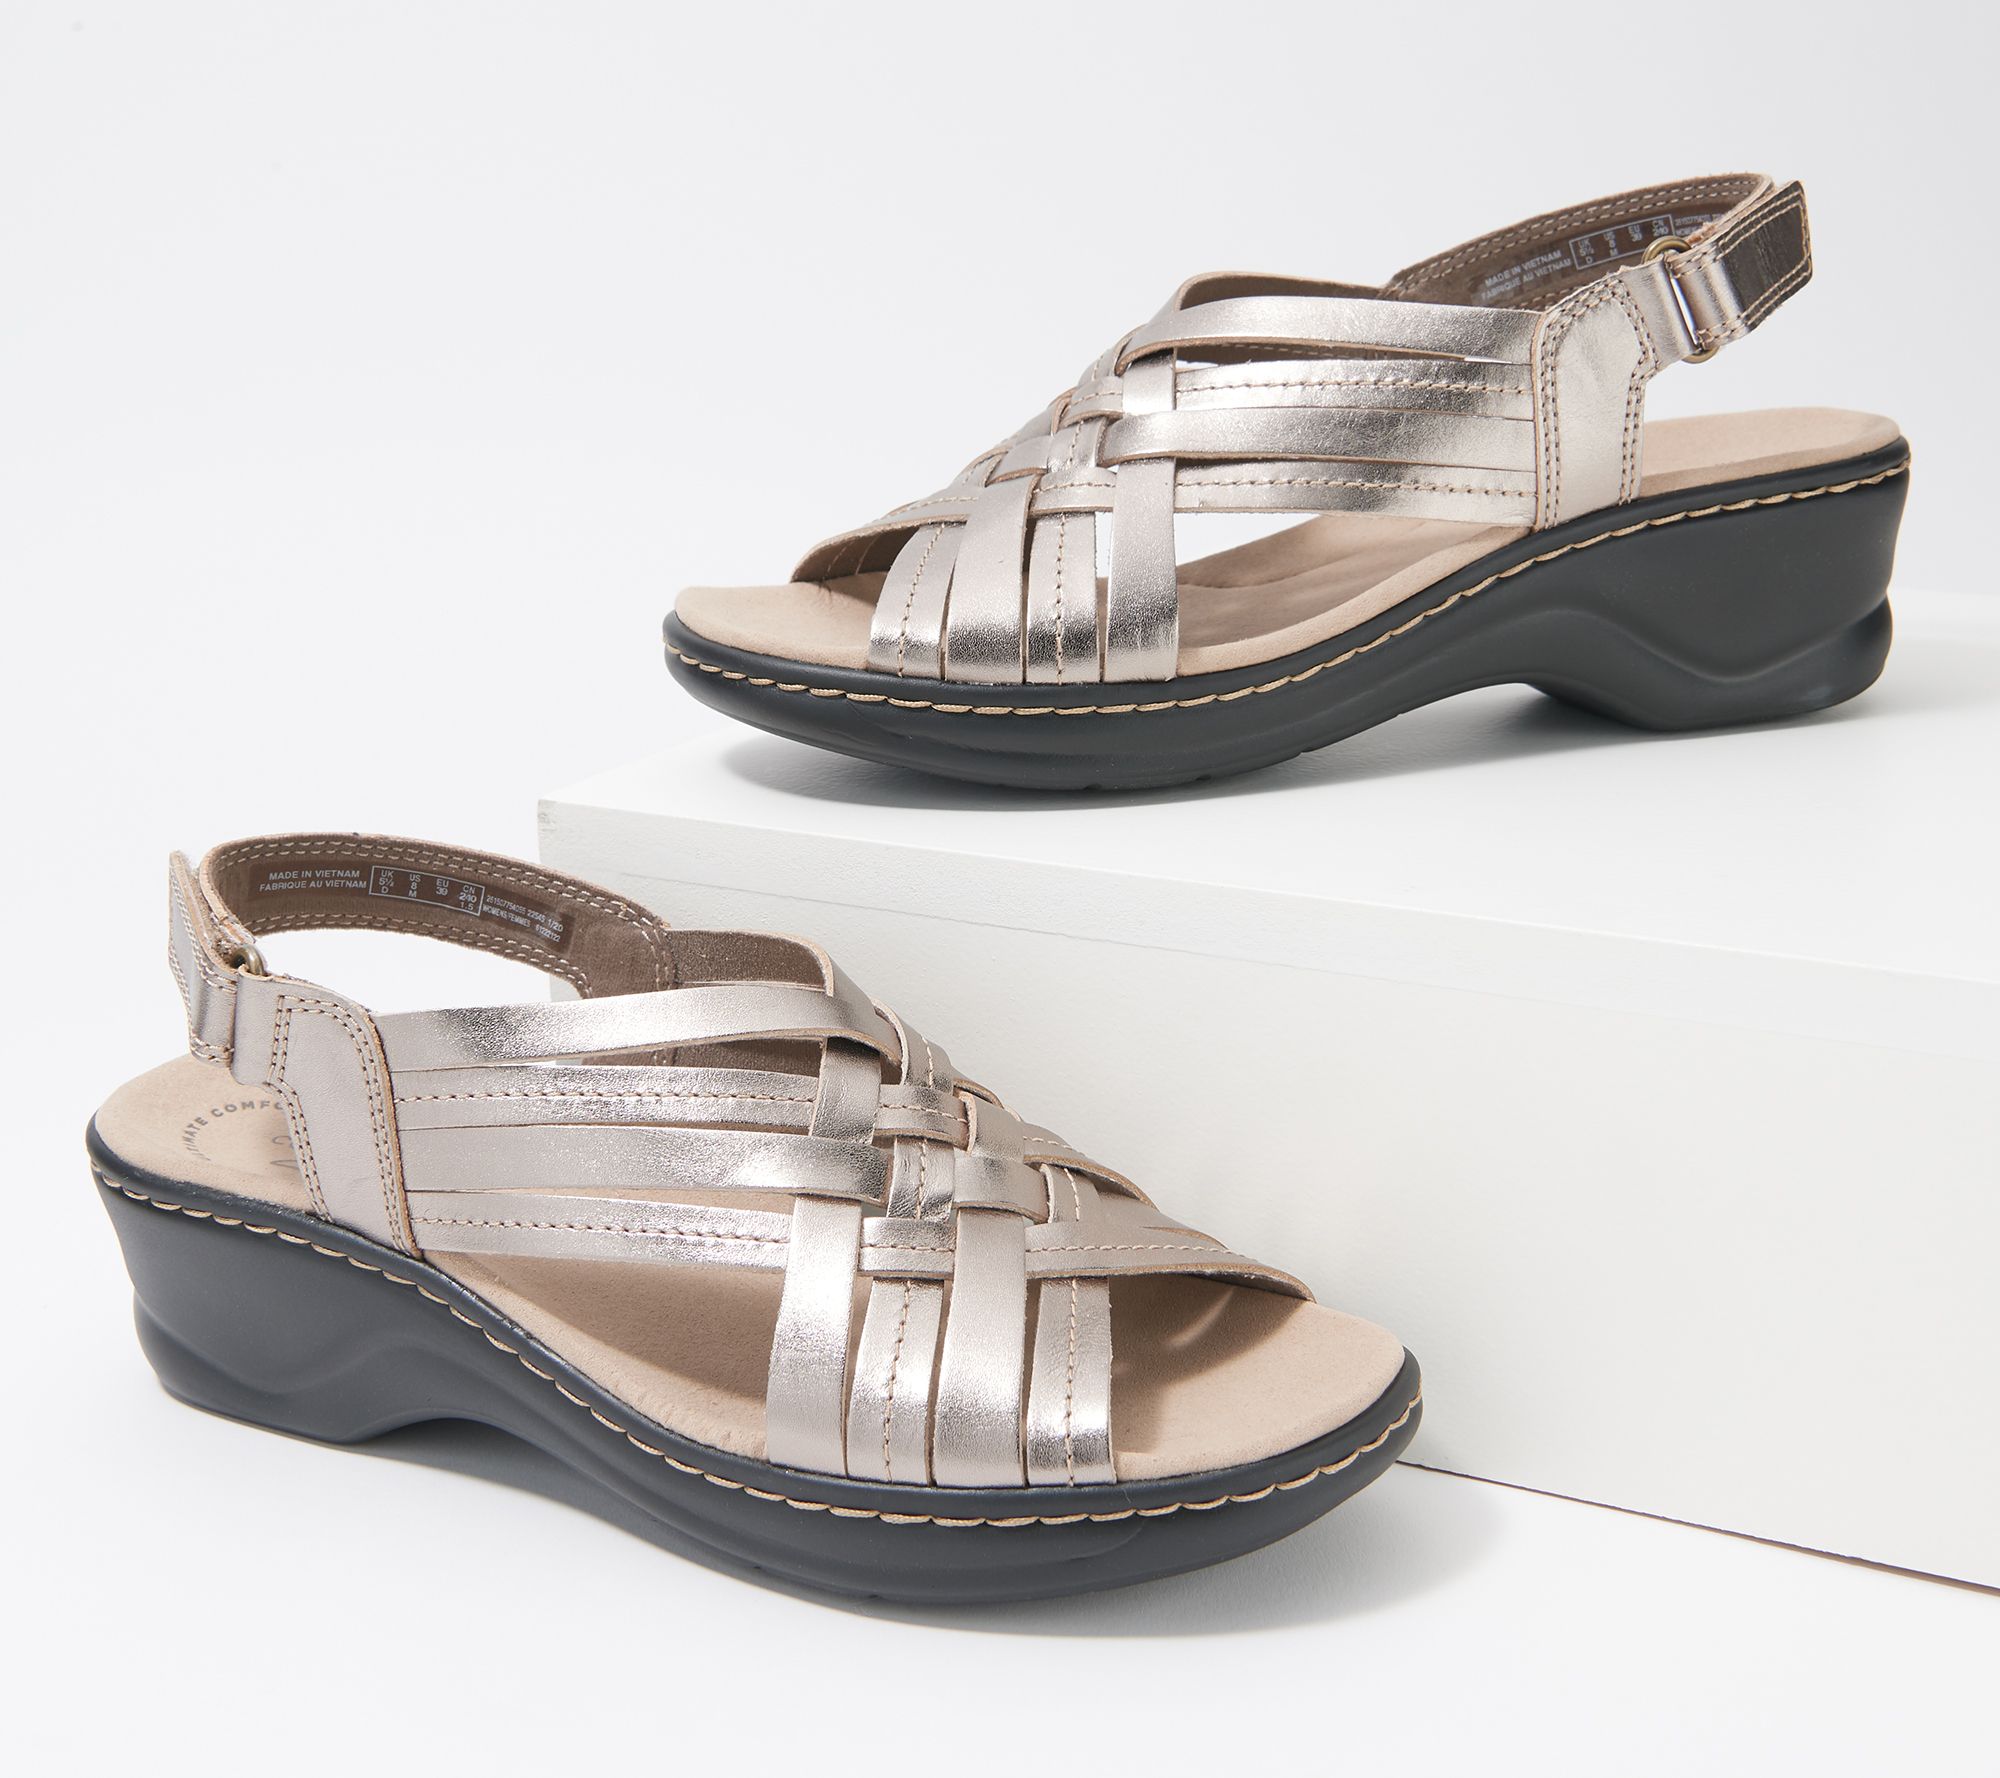 clarks wedge sandals on qvc